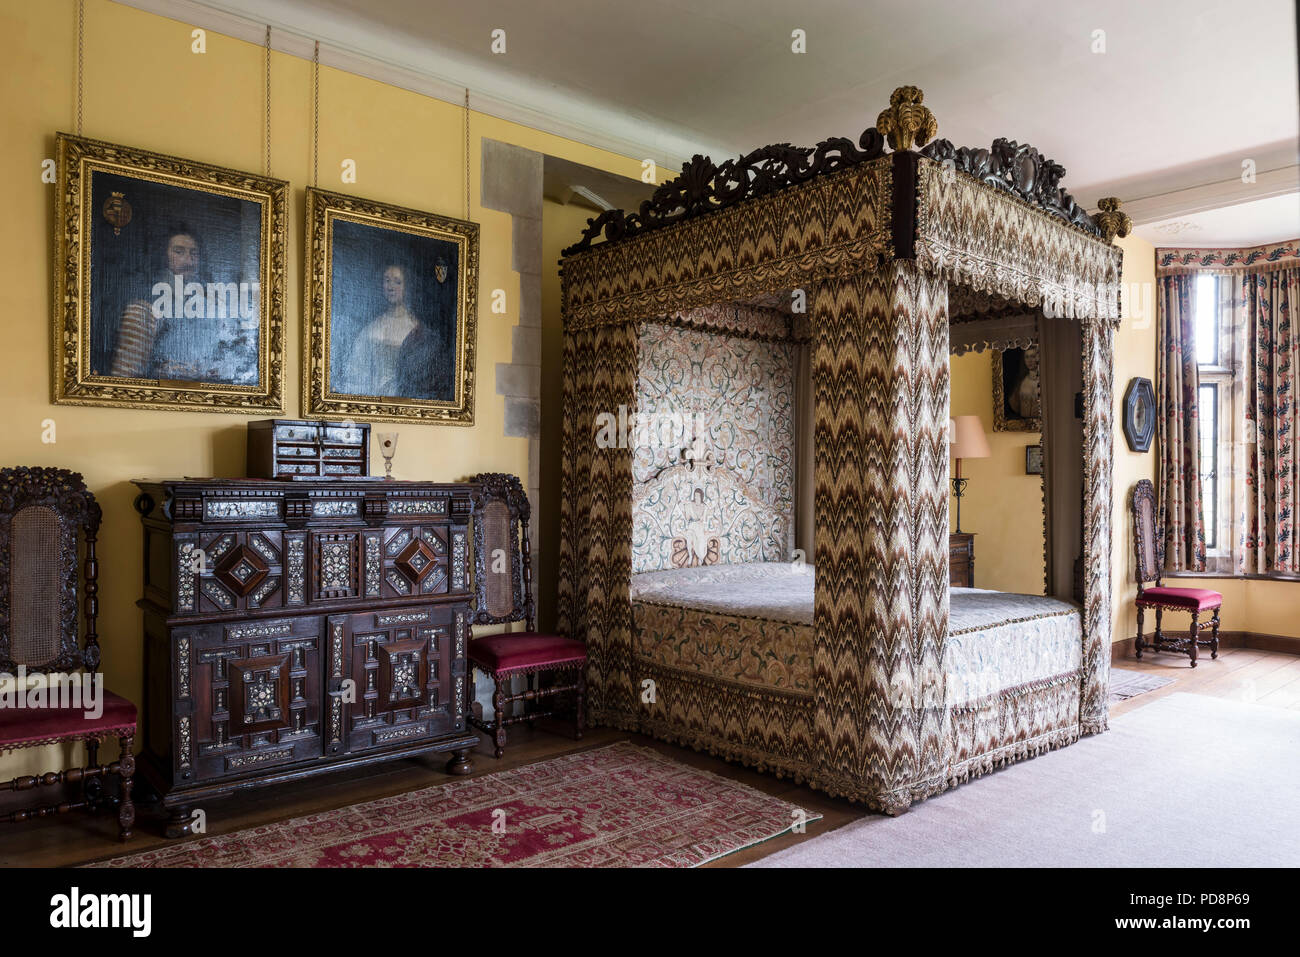 Four postered bed with  17th century flame stitch embroidery and gilt framed artwork above inlaid cabinet Stock Photo